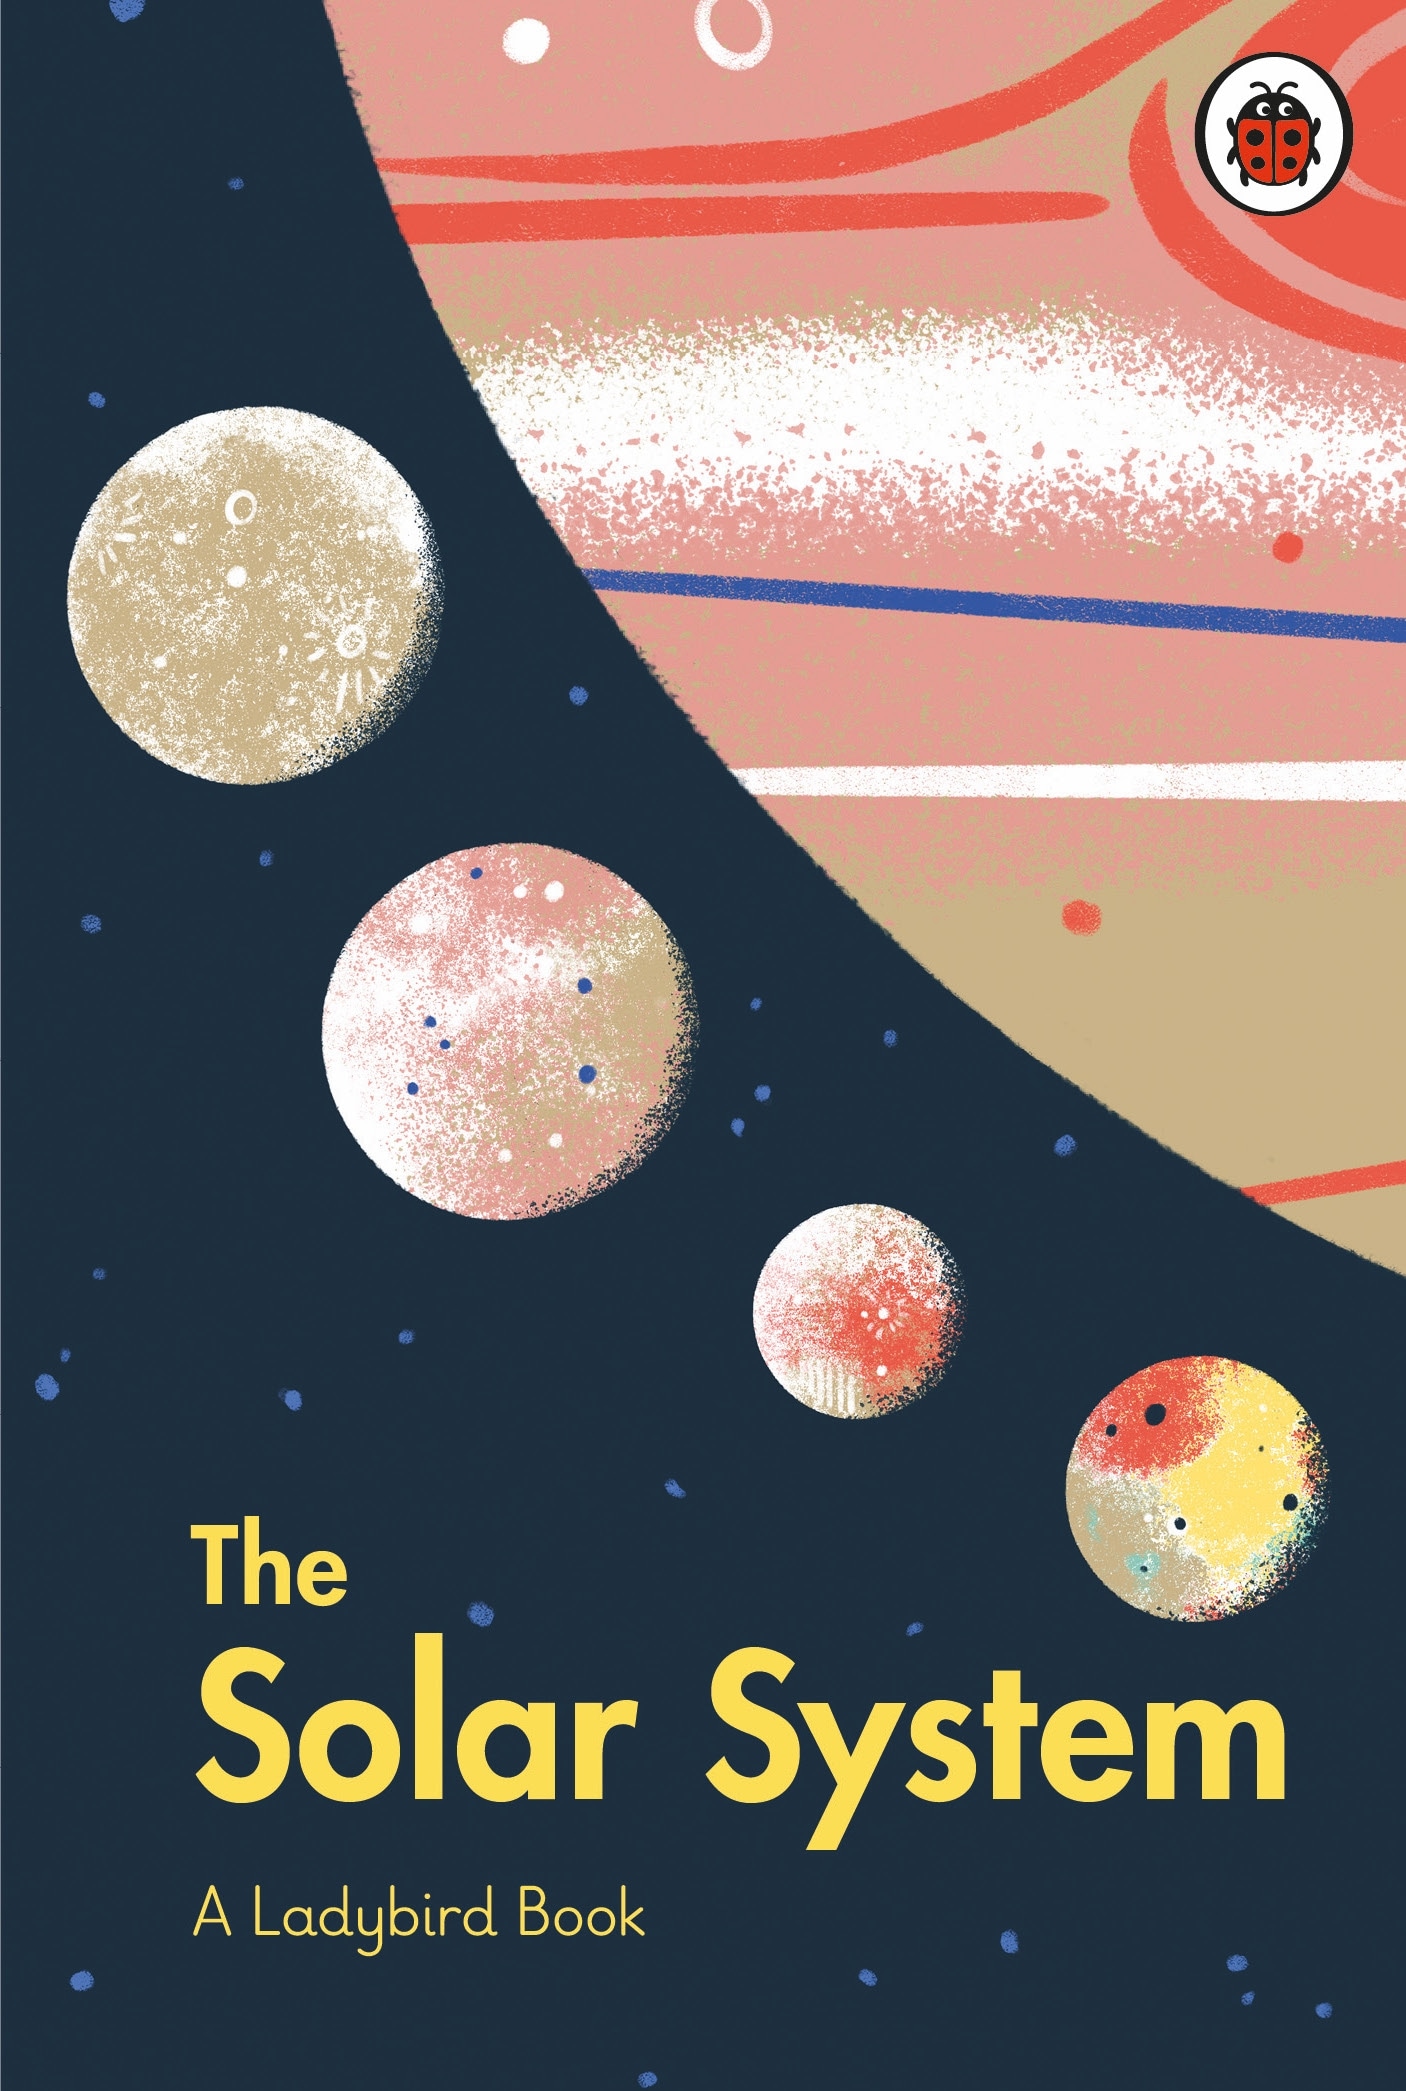 Book “A Ladybird Book: The Solar System” by Stuart Atkinson, Brave The Woods — August 5, 2021